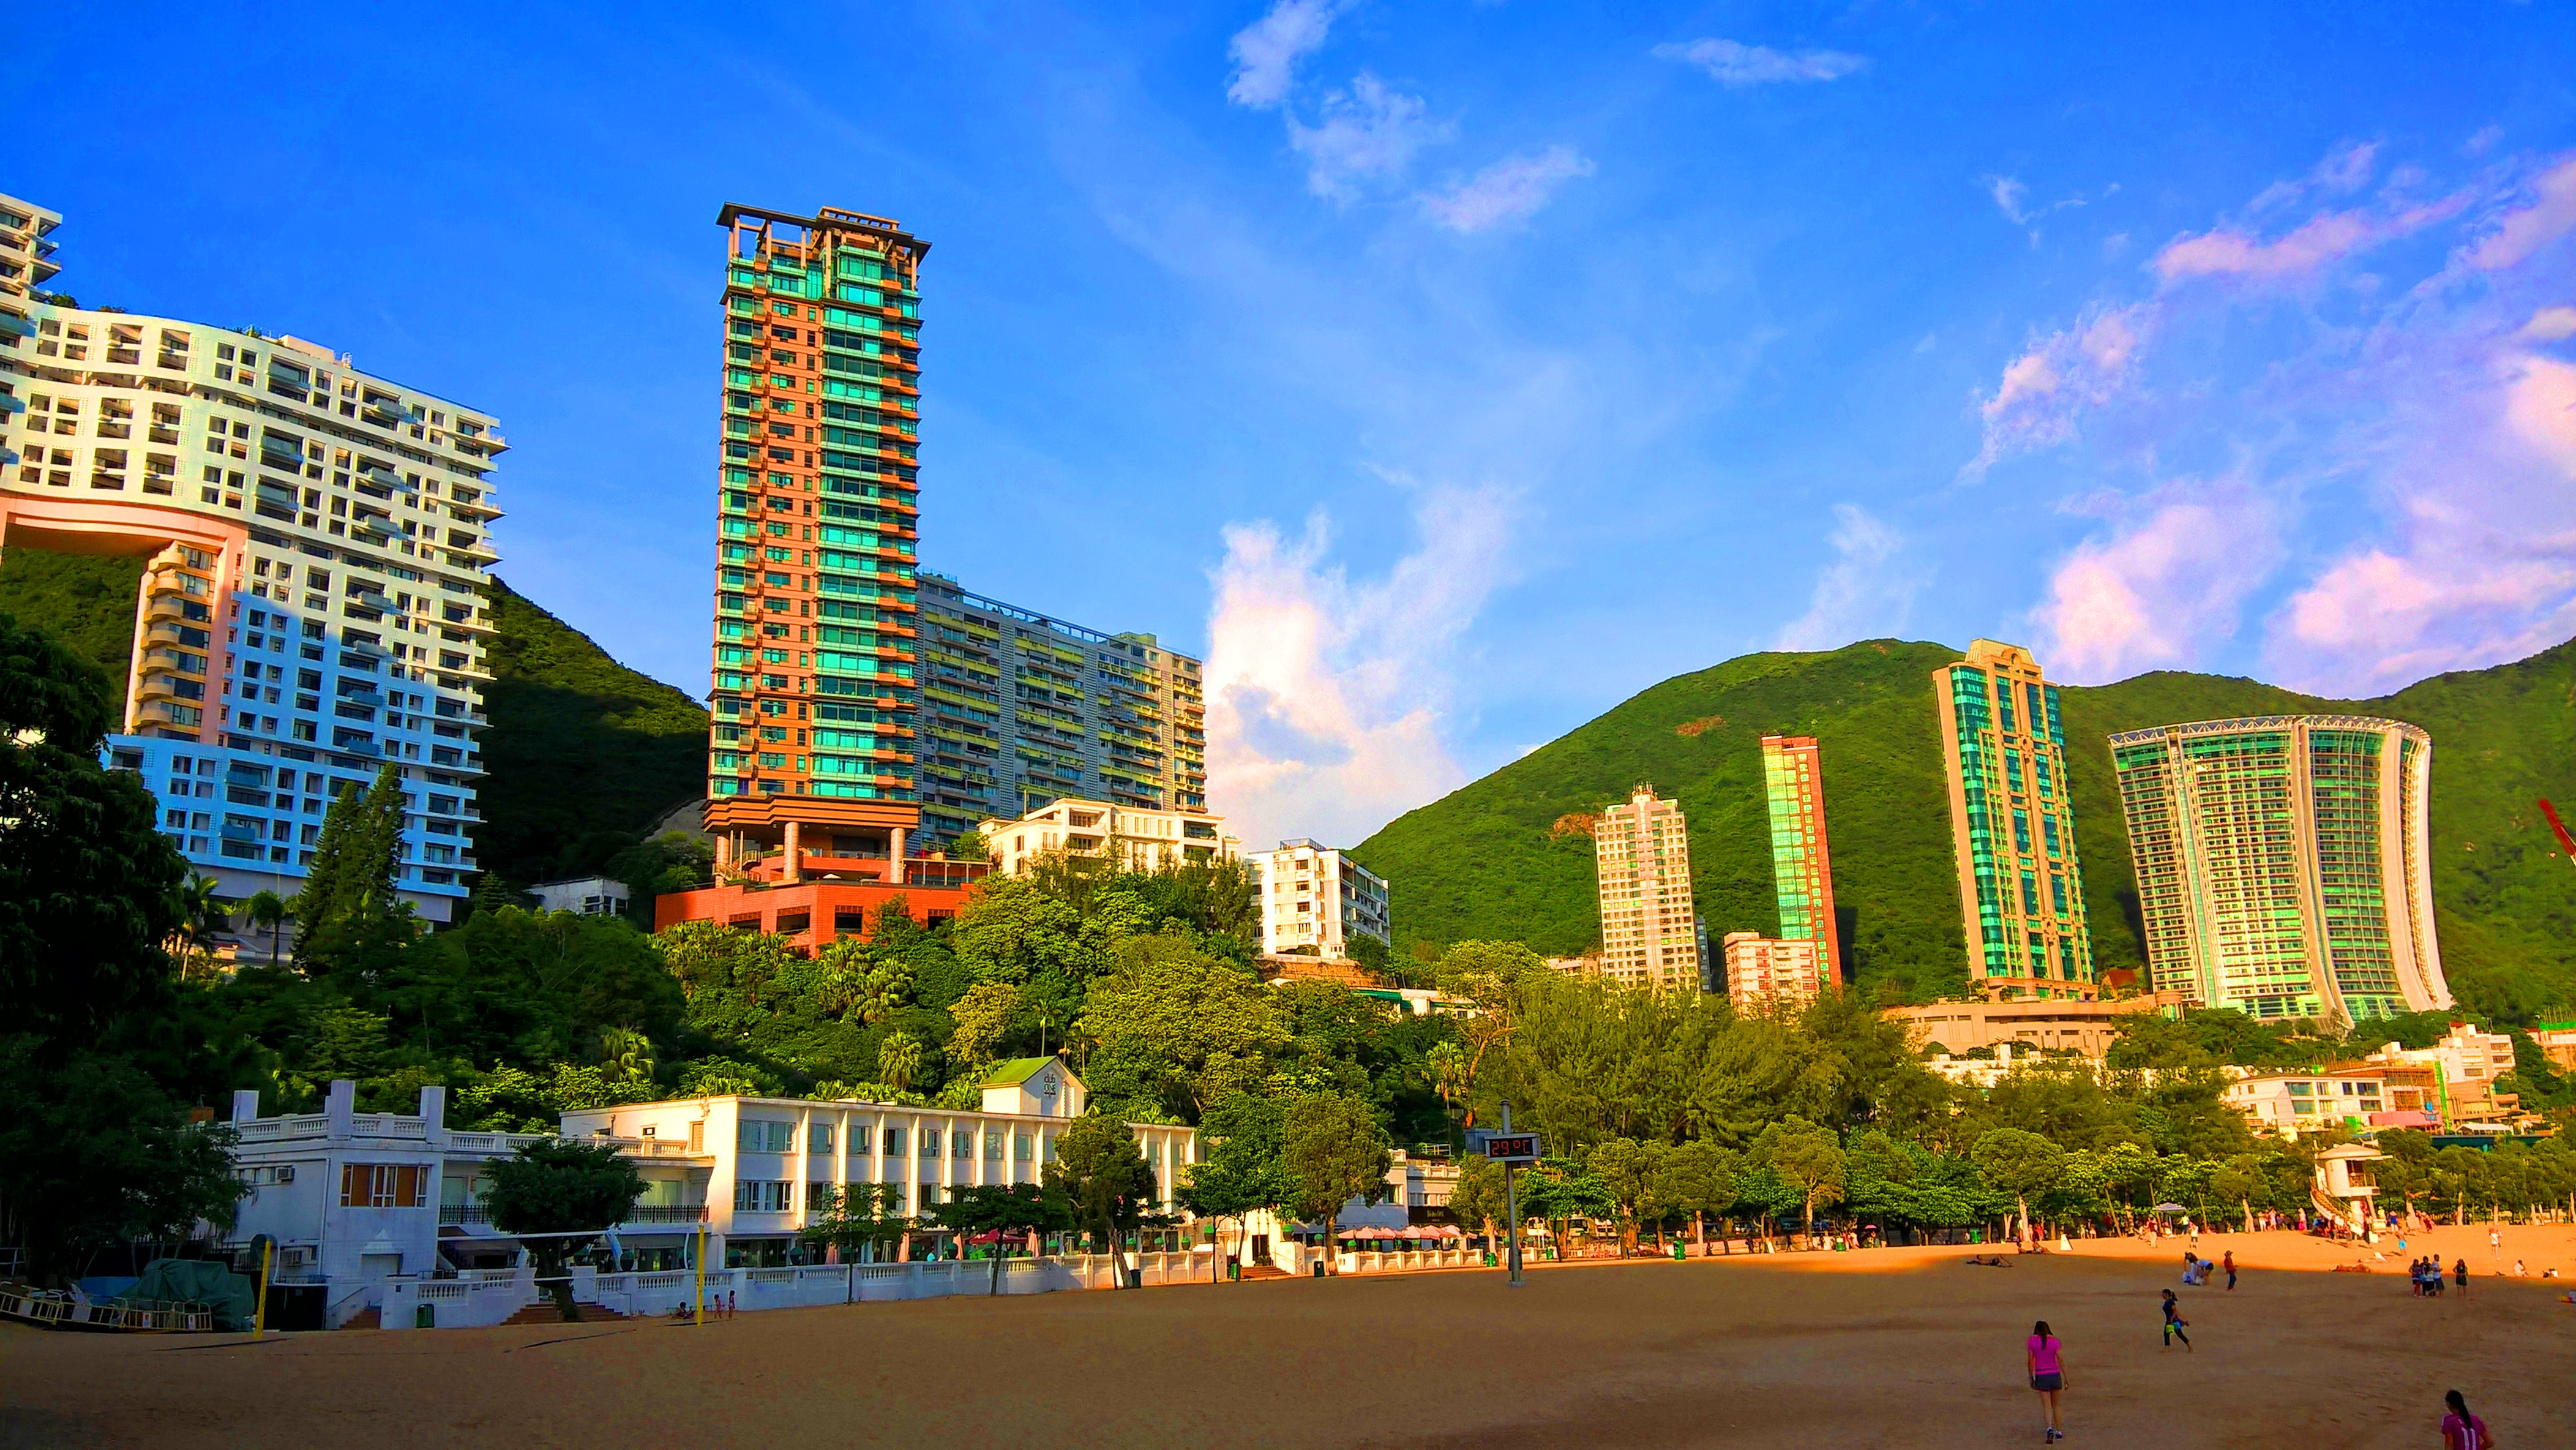 Repulse Bay Beach and the Lily service apartment